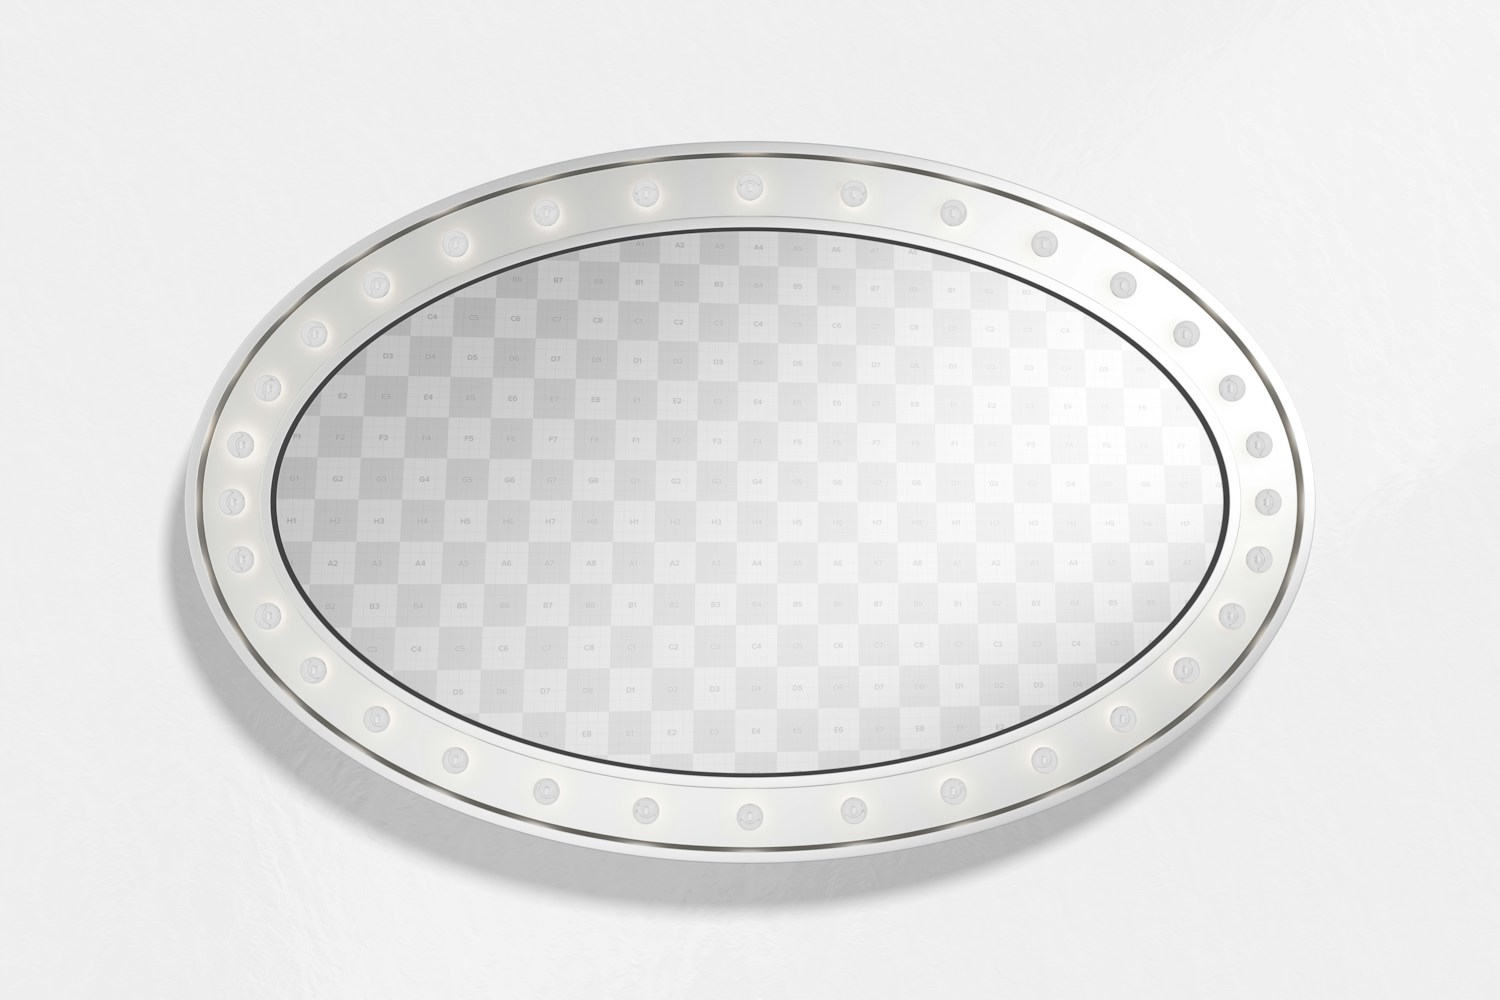 Luminous Oval Promotional Sign Mockup, Top View